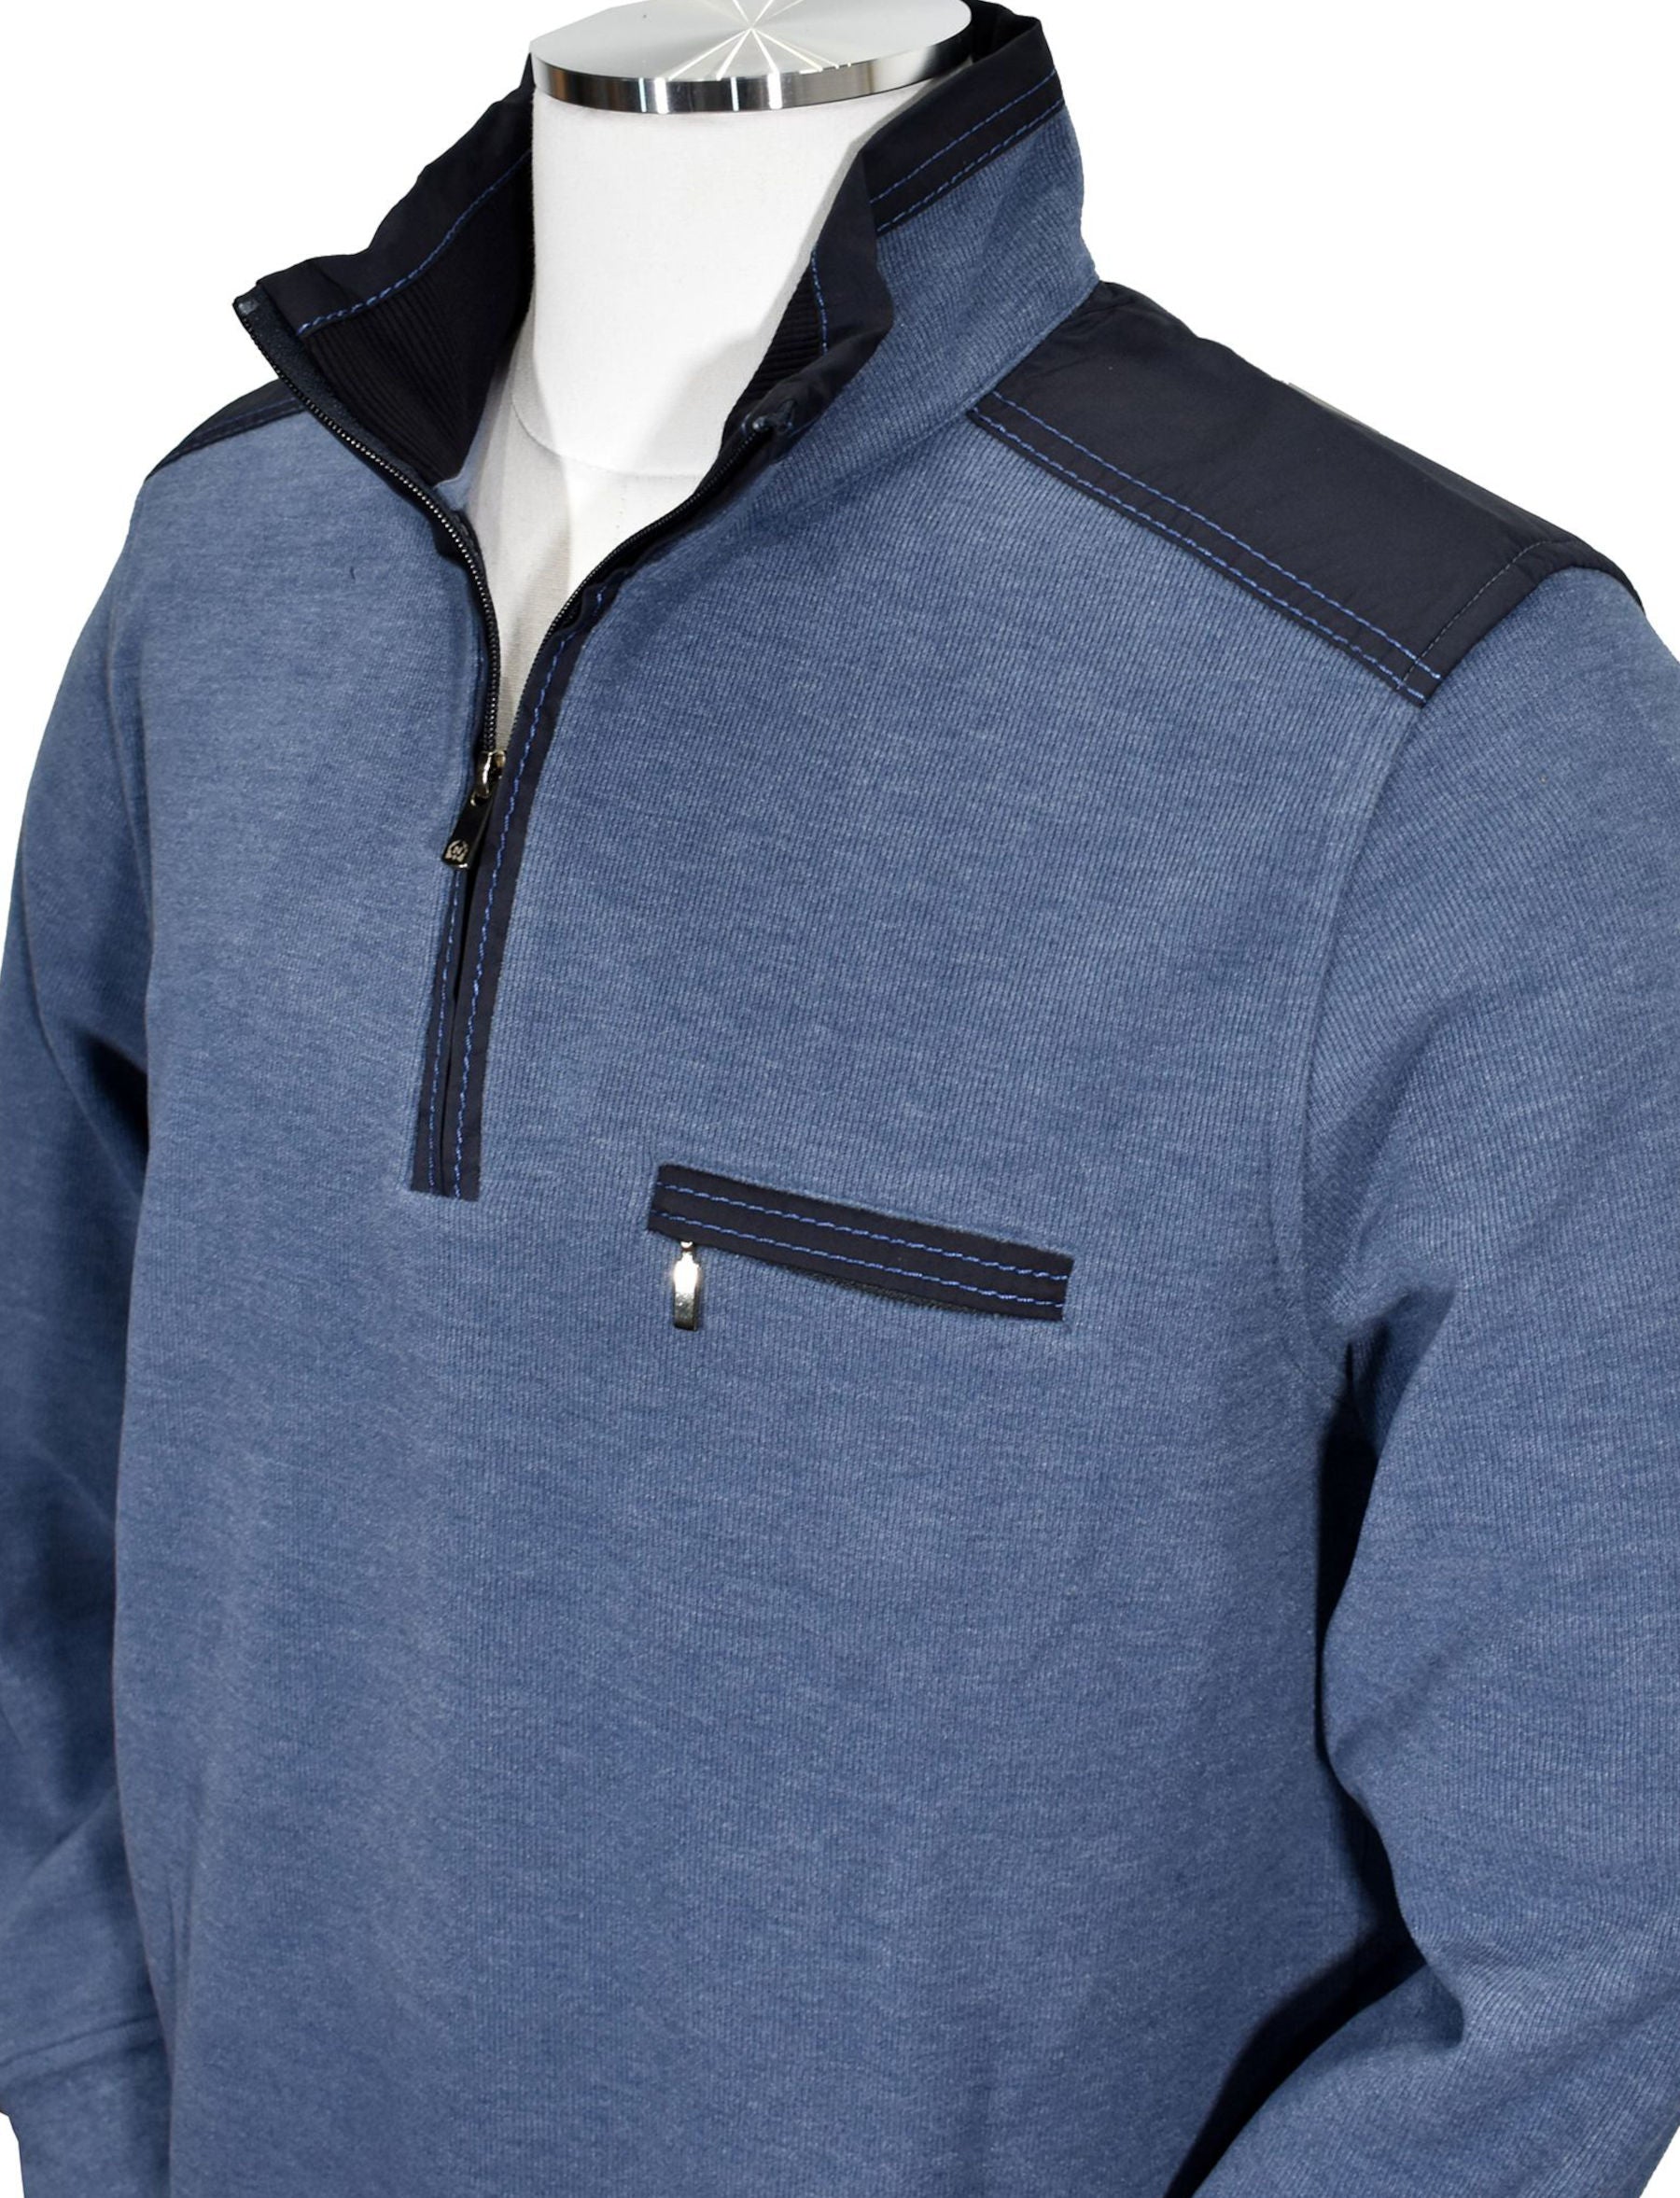 Cotton based fabric in a light to moderate weight, with contrast fabric detailing, and further accented with contrast stitching.   Great for an active lifestyle or just the image of an active or nautical lifestyle.   Soft mock neck model for added comfort with classic ribbed cuffs and waist band.  Classic fit.  Blue color, by Marcello Sport.